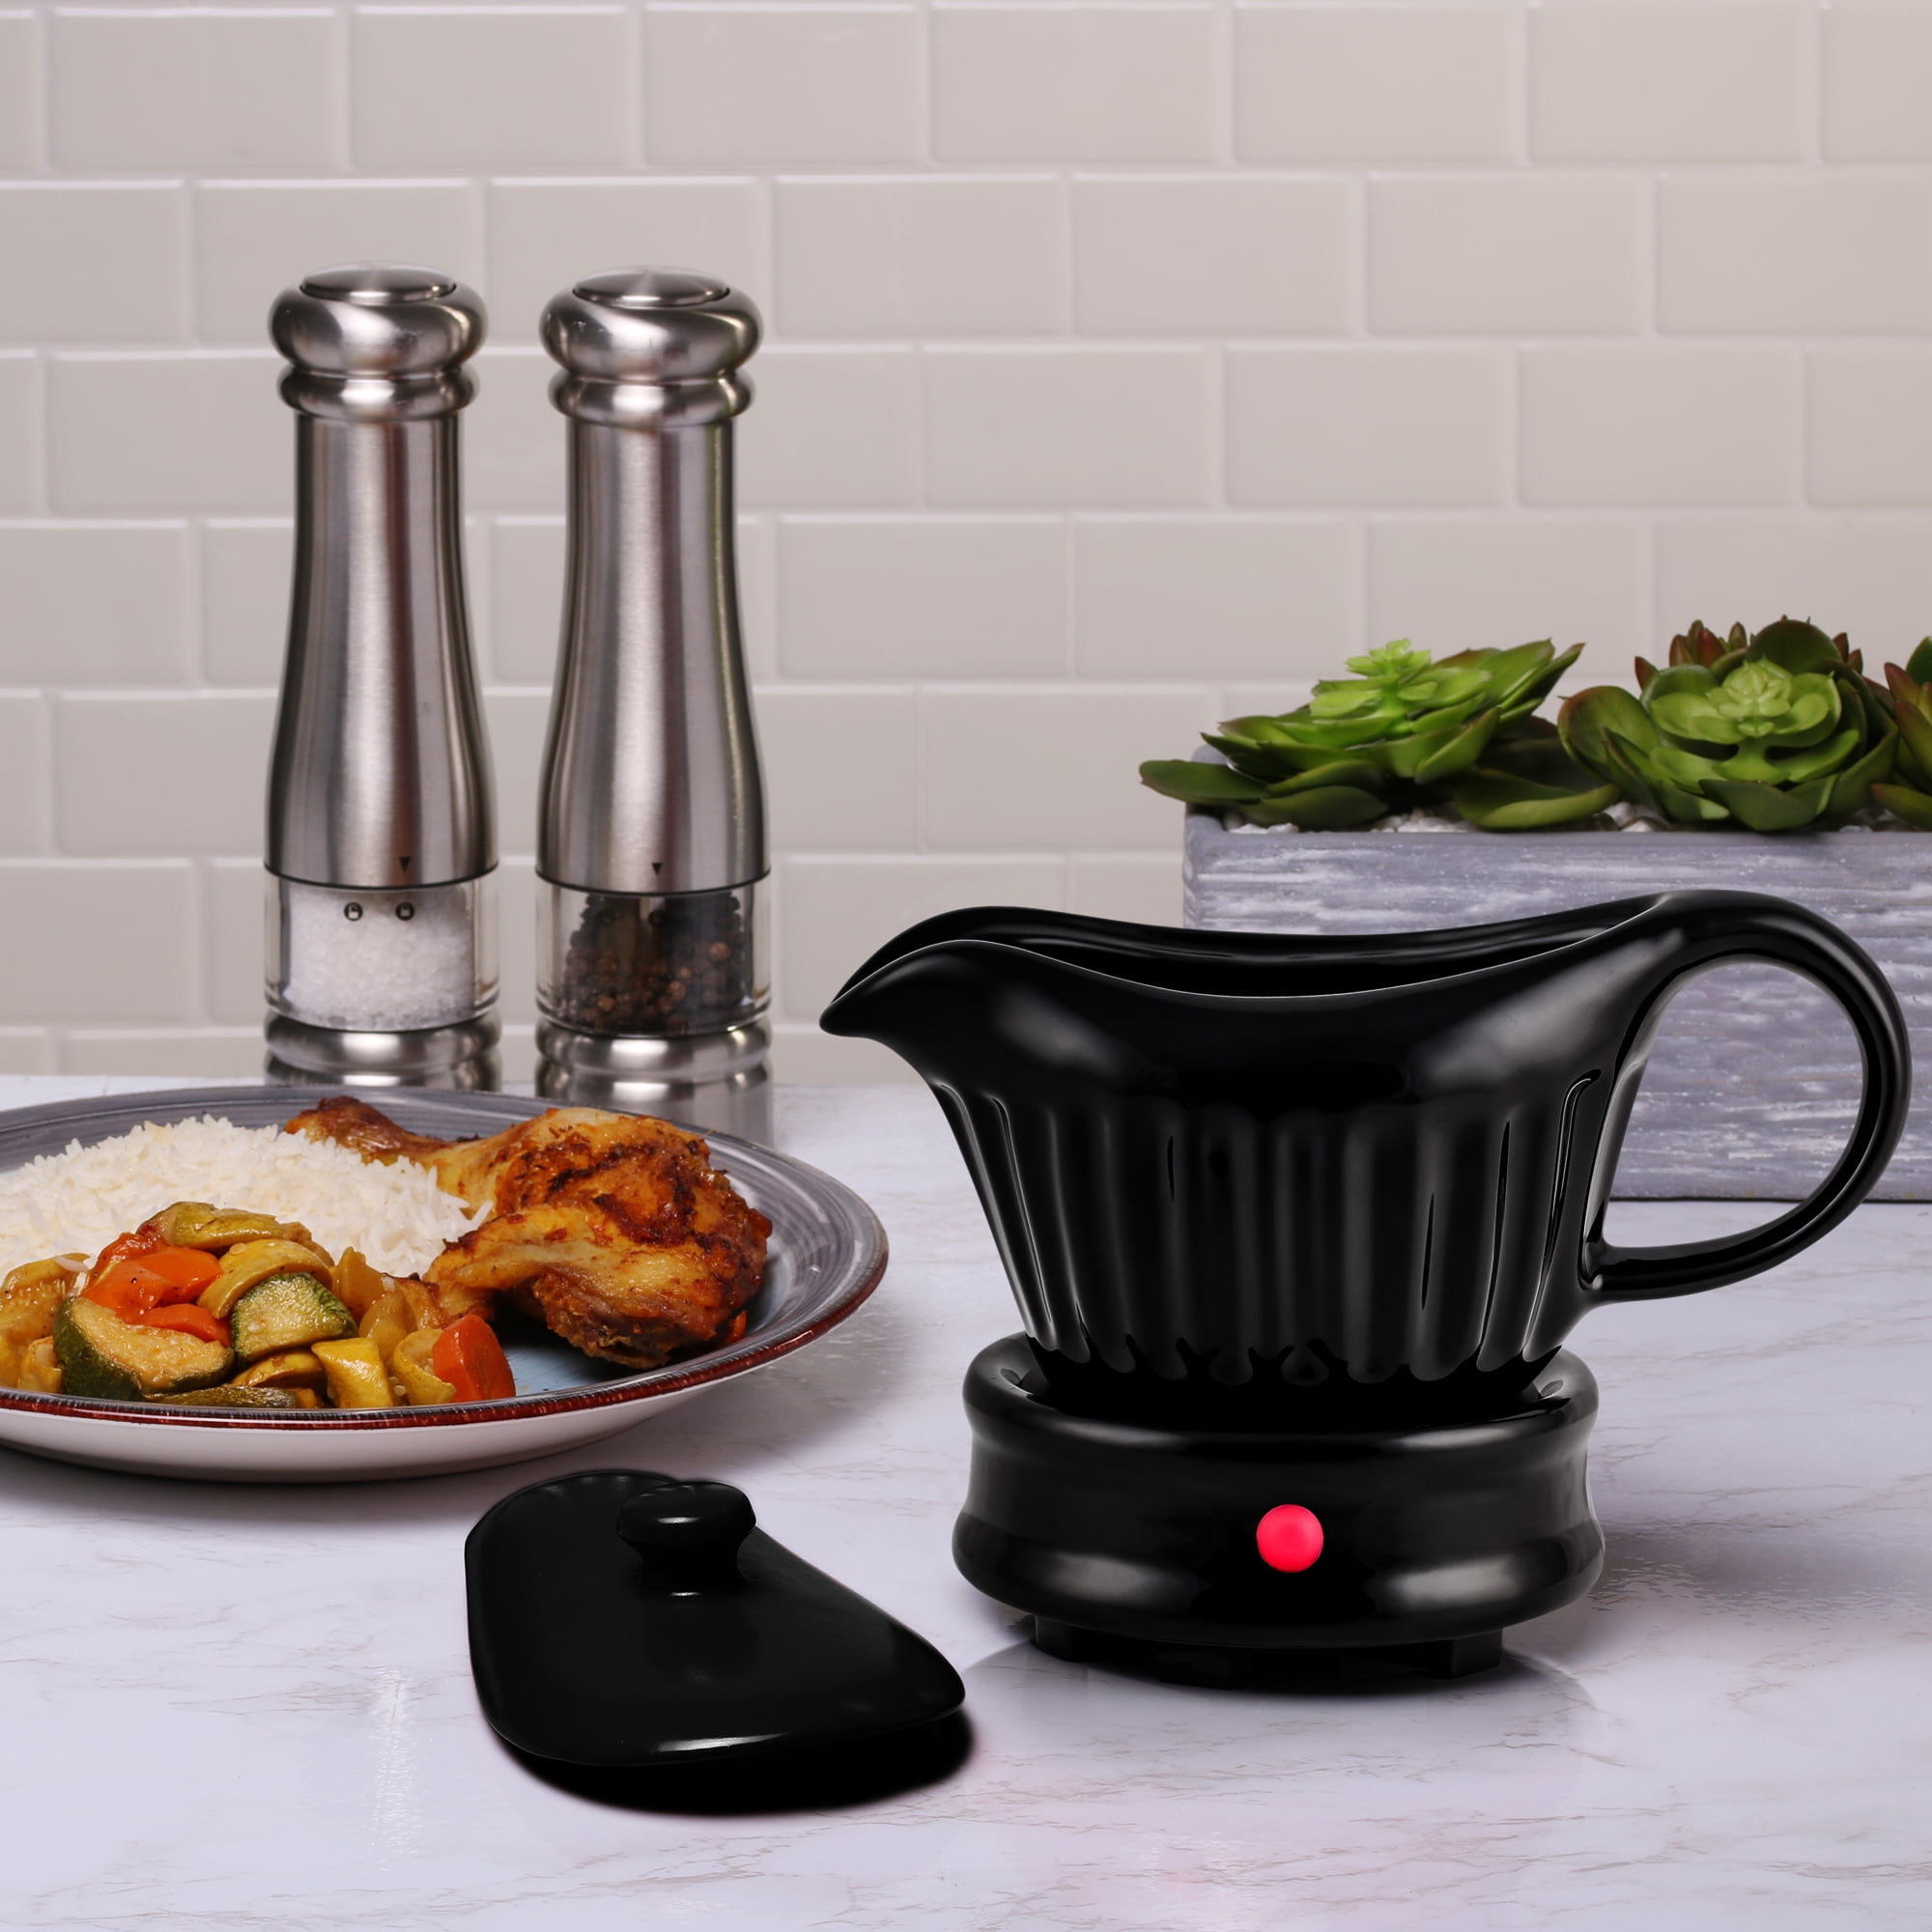 FW024589B OVENTE Electric Gravy Sauce Boat Warmer with Detachable 13.5 Ounce Ceramic Pot Black Lid and Warming Base 